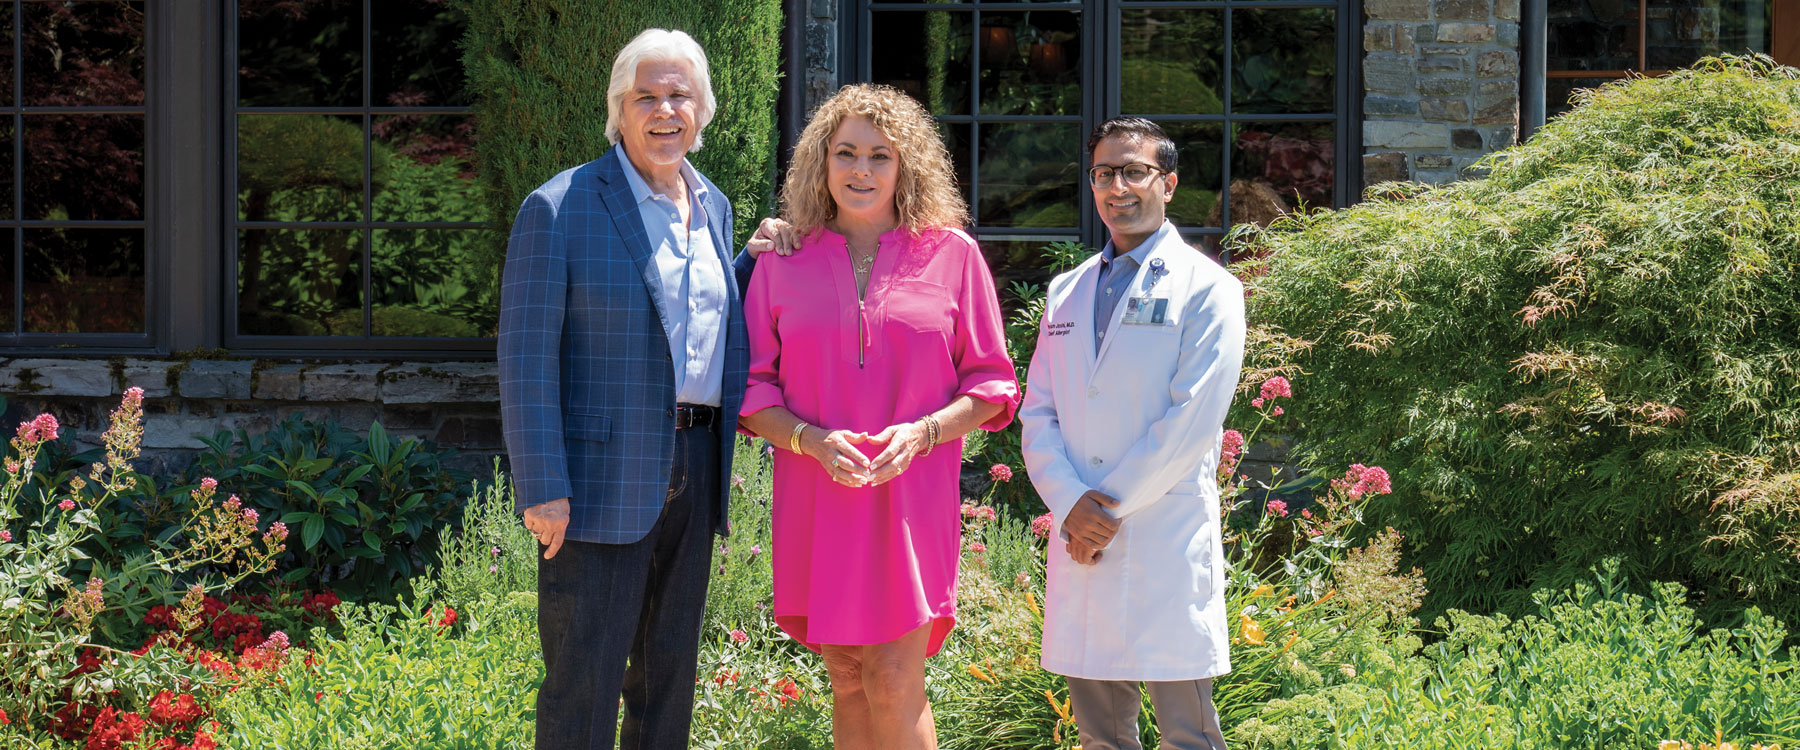 Dale and Julie Burghardt with Shyam Joshi, M.D.